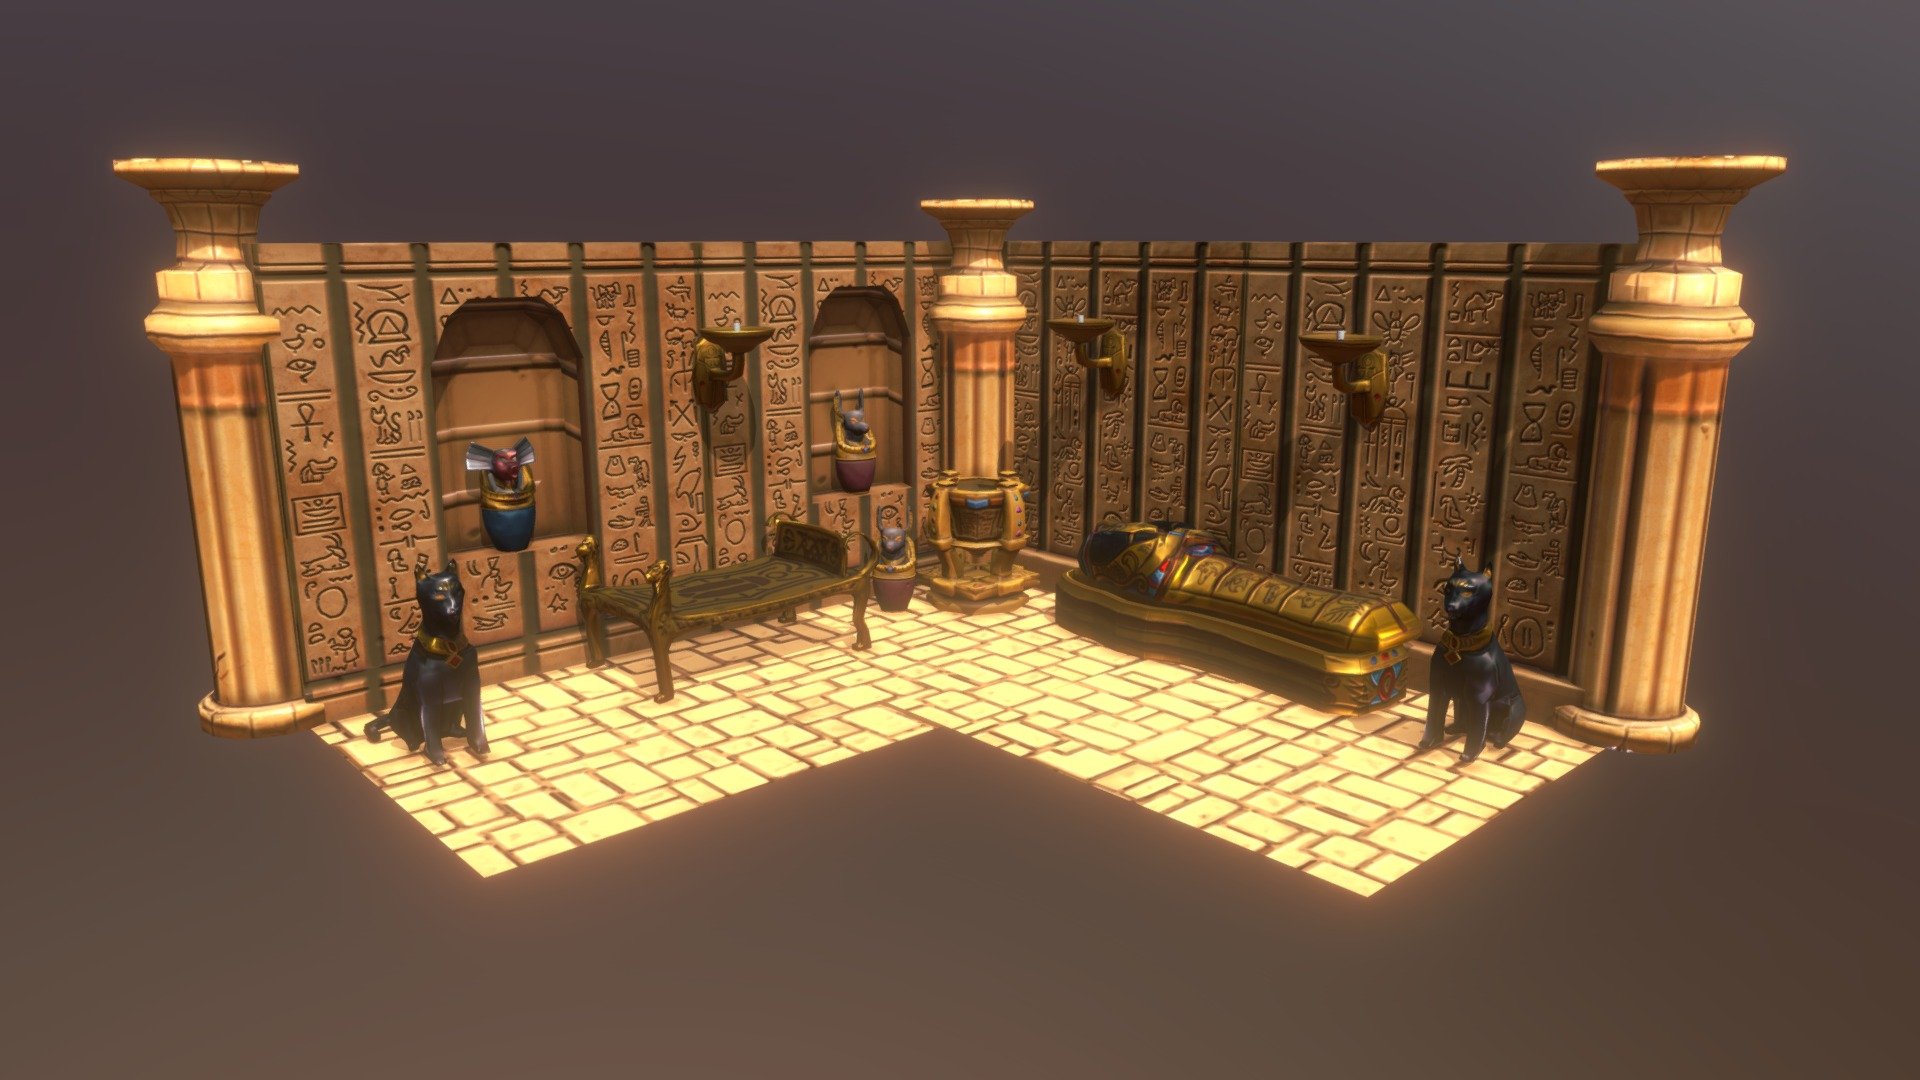 A stylized diorama and modular set for creating an Egyptian tomb. The set includes pillars, walls, flooring, and several props to help decorate the scene 3d model